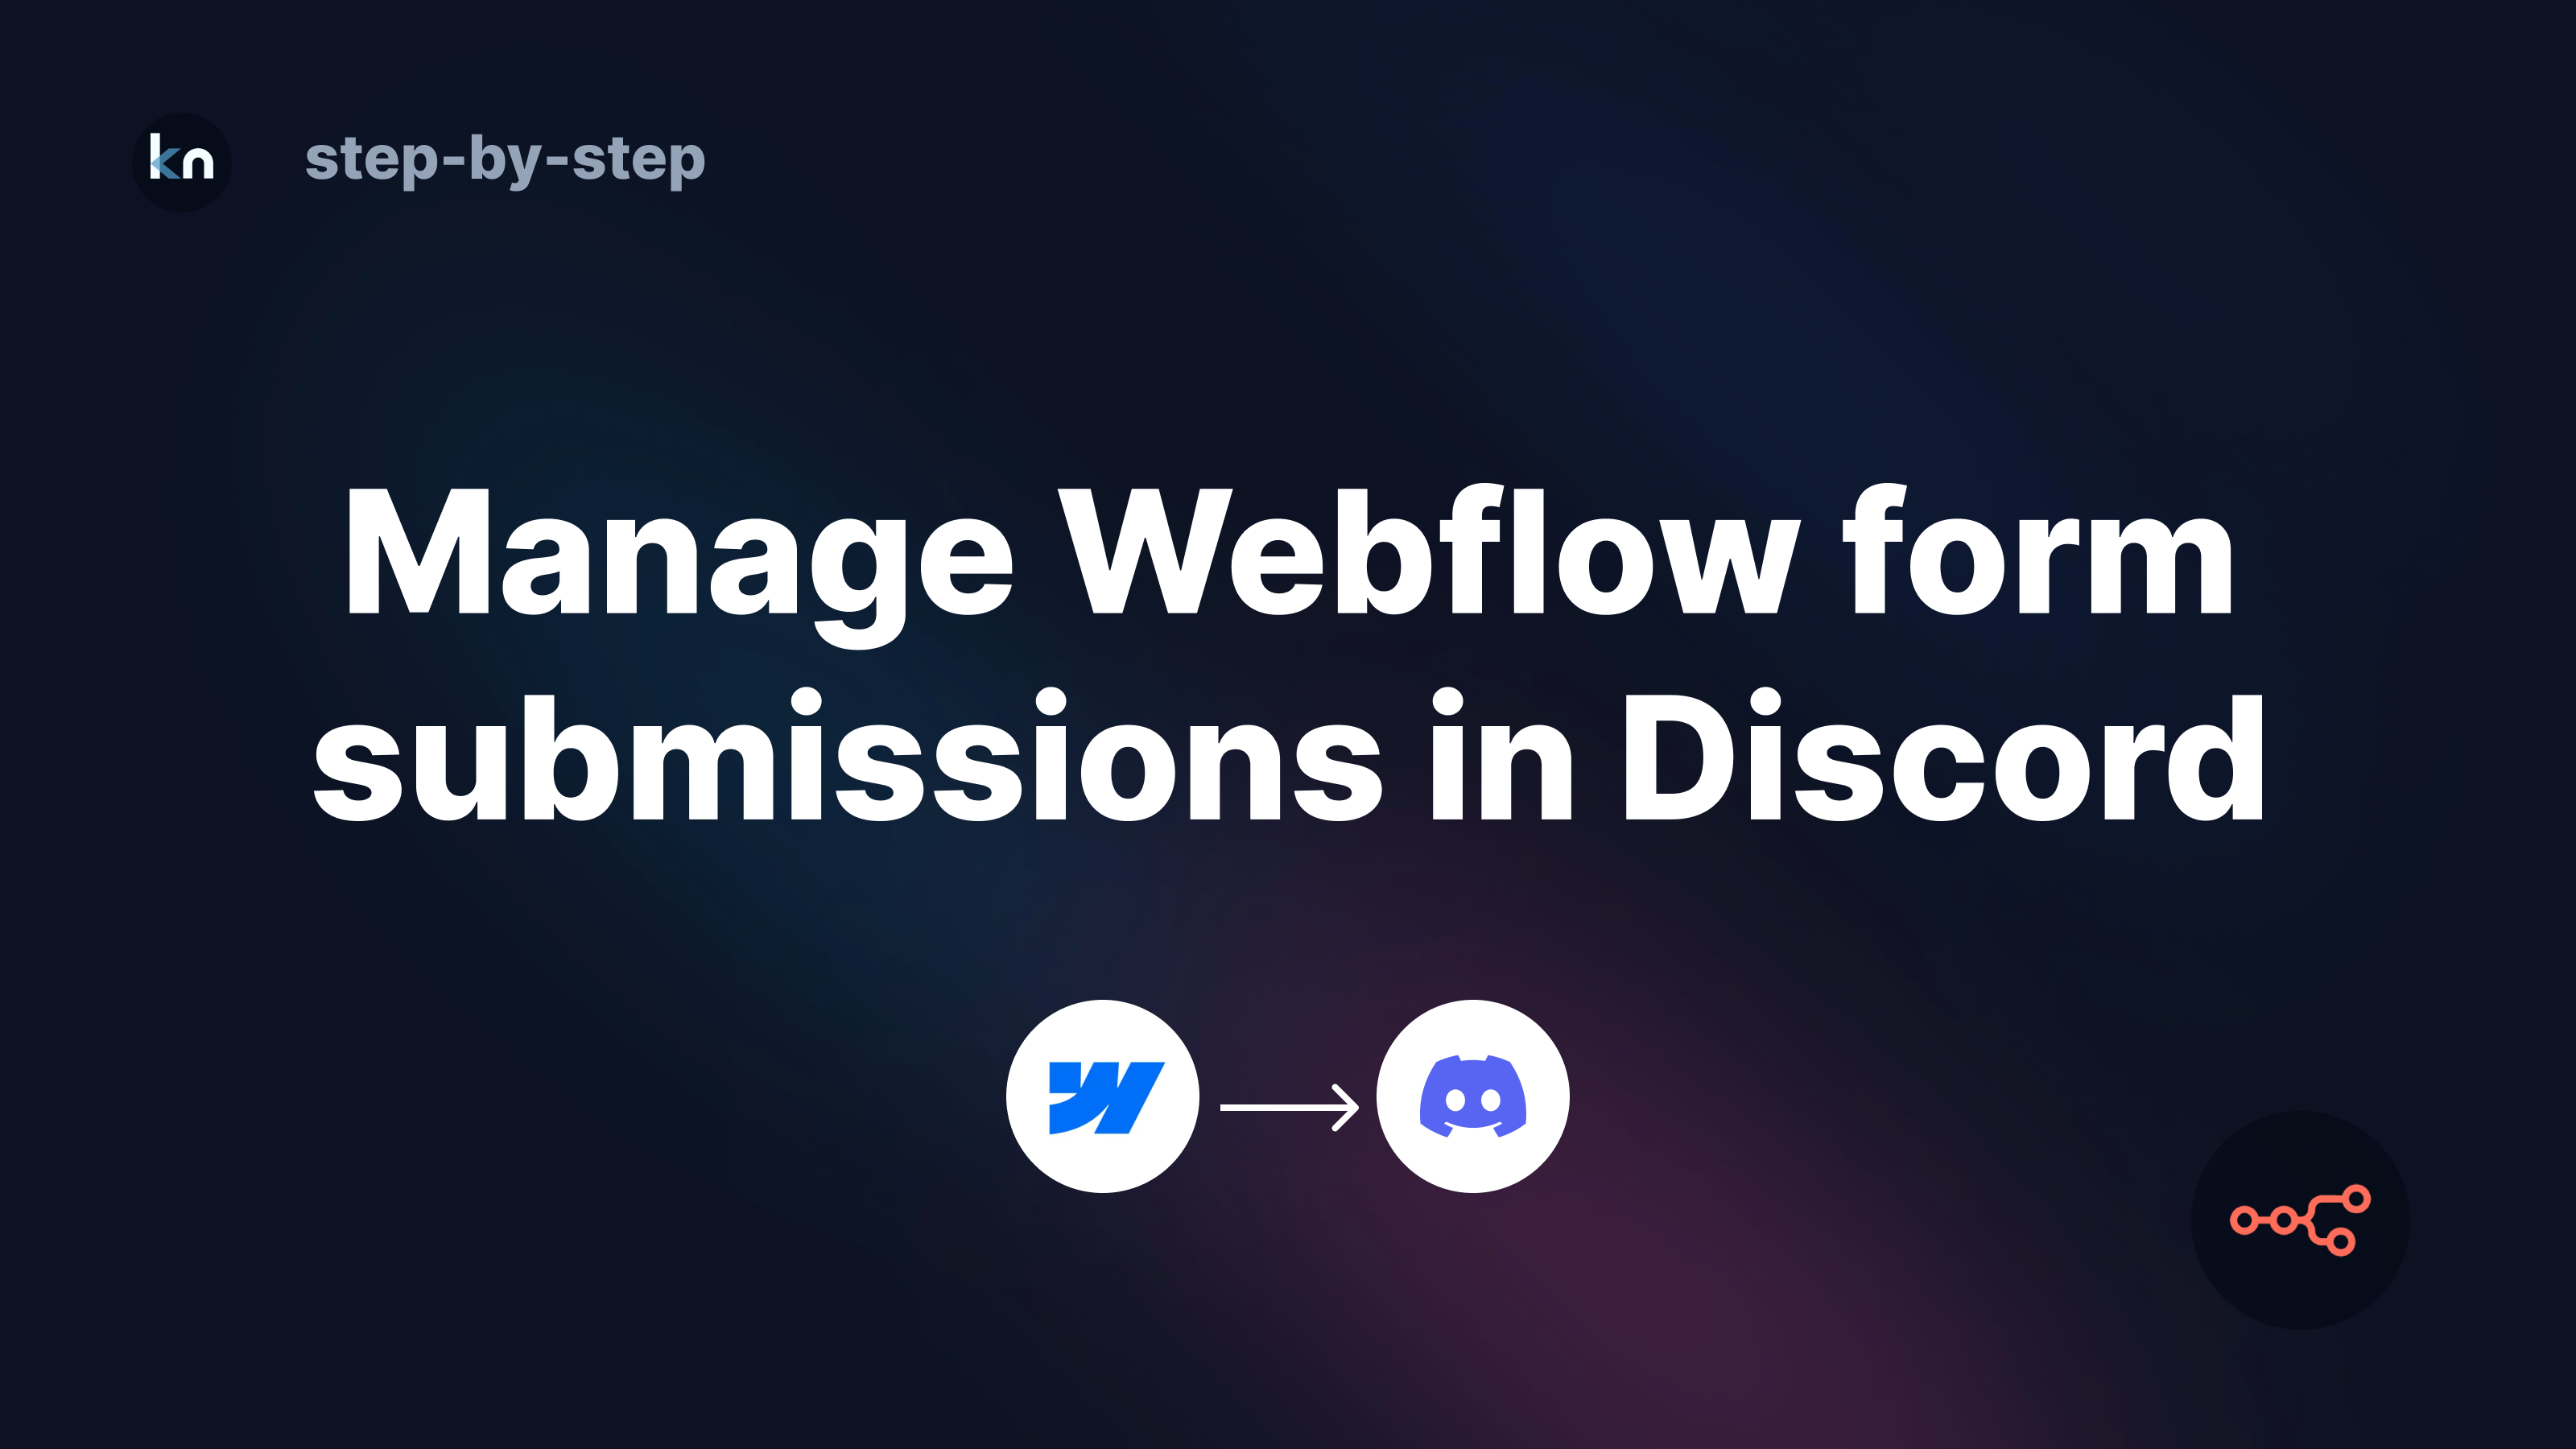 Send Webflow form submissions to Discord server